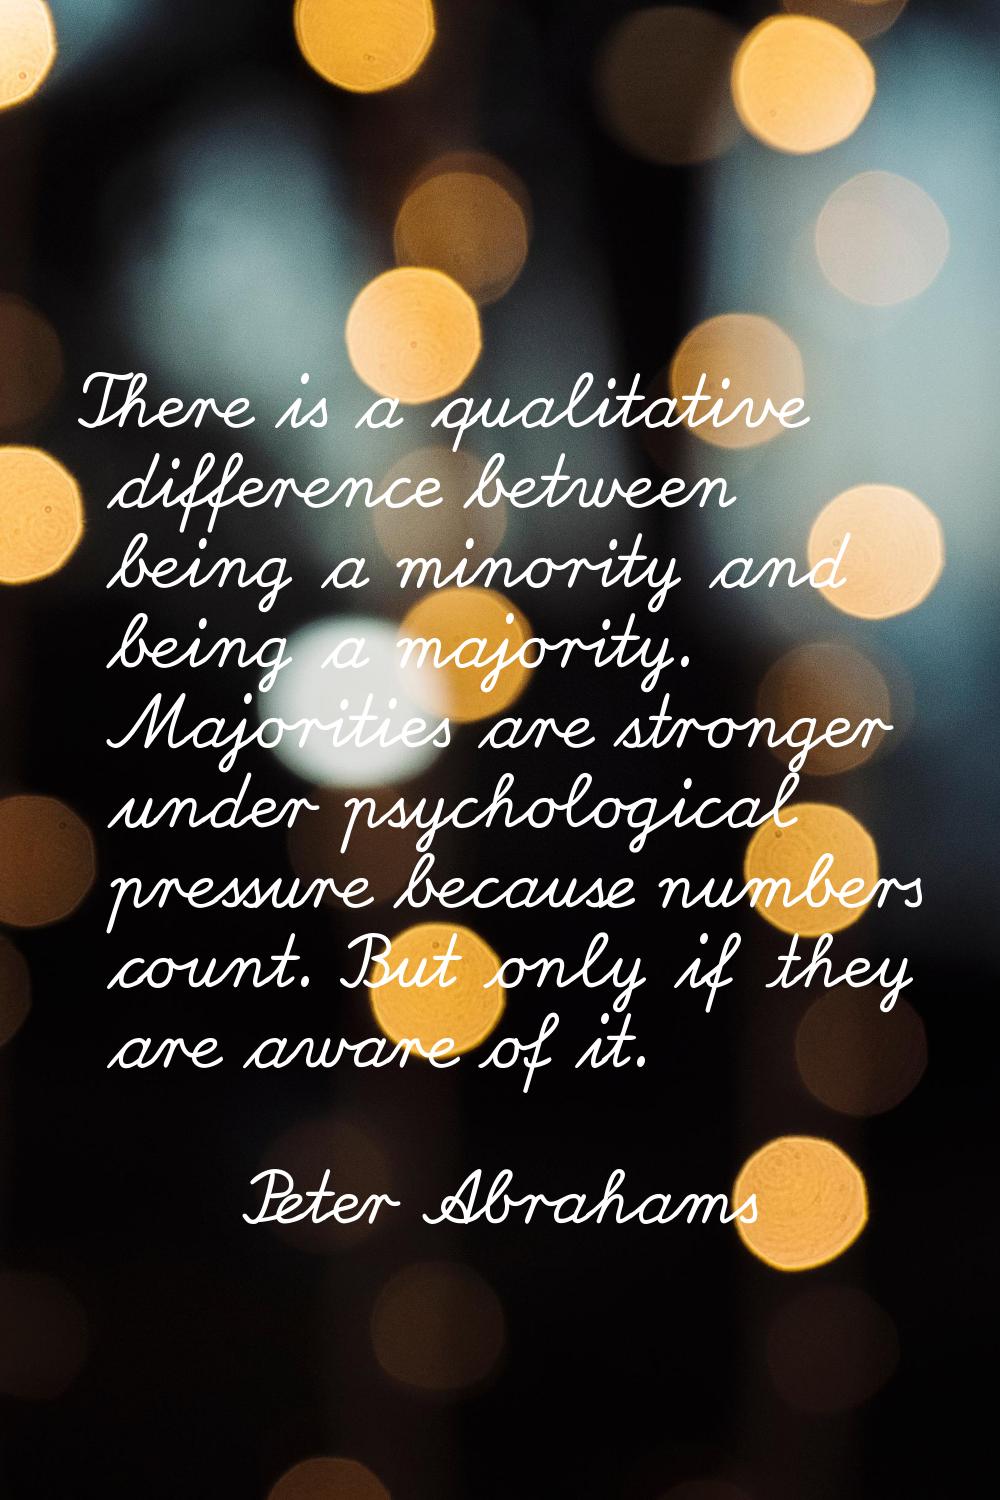 There is a qualitative difference between being a minority and being a majority. Majorities are str